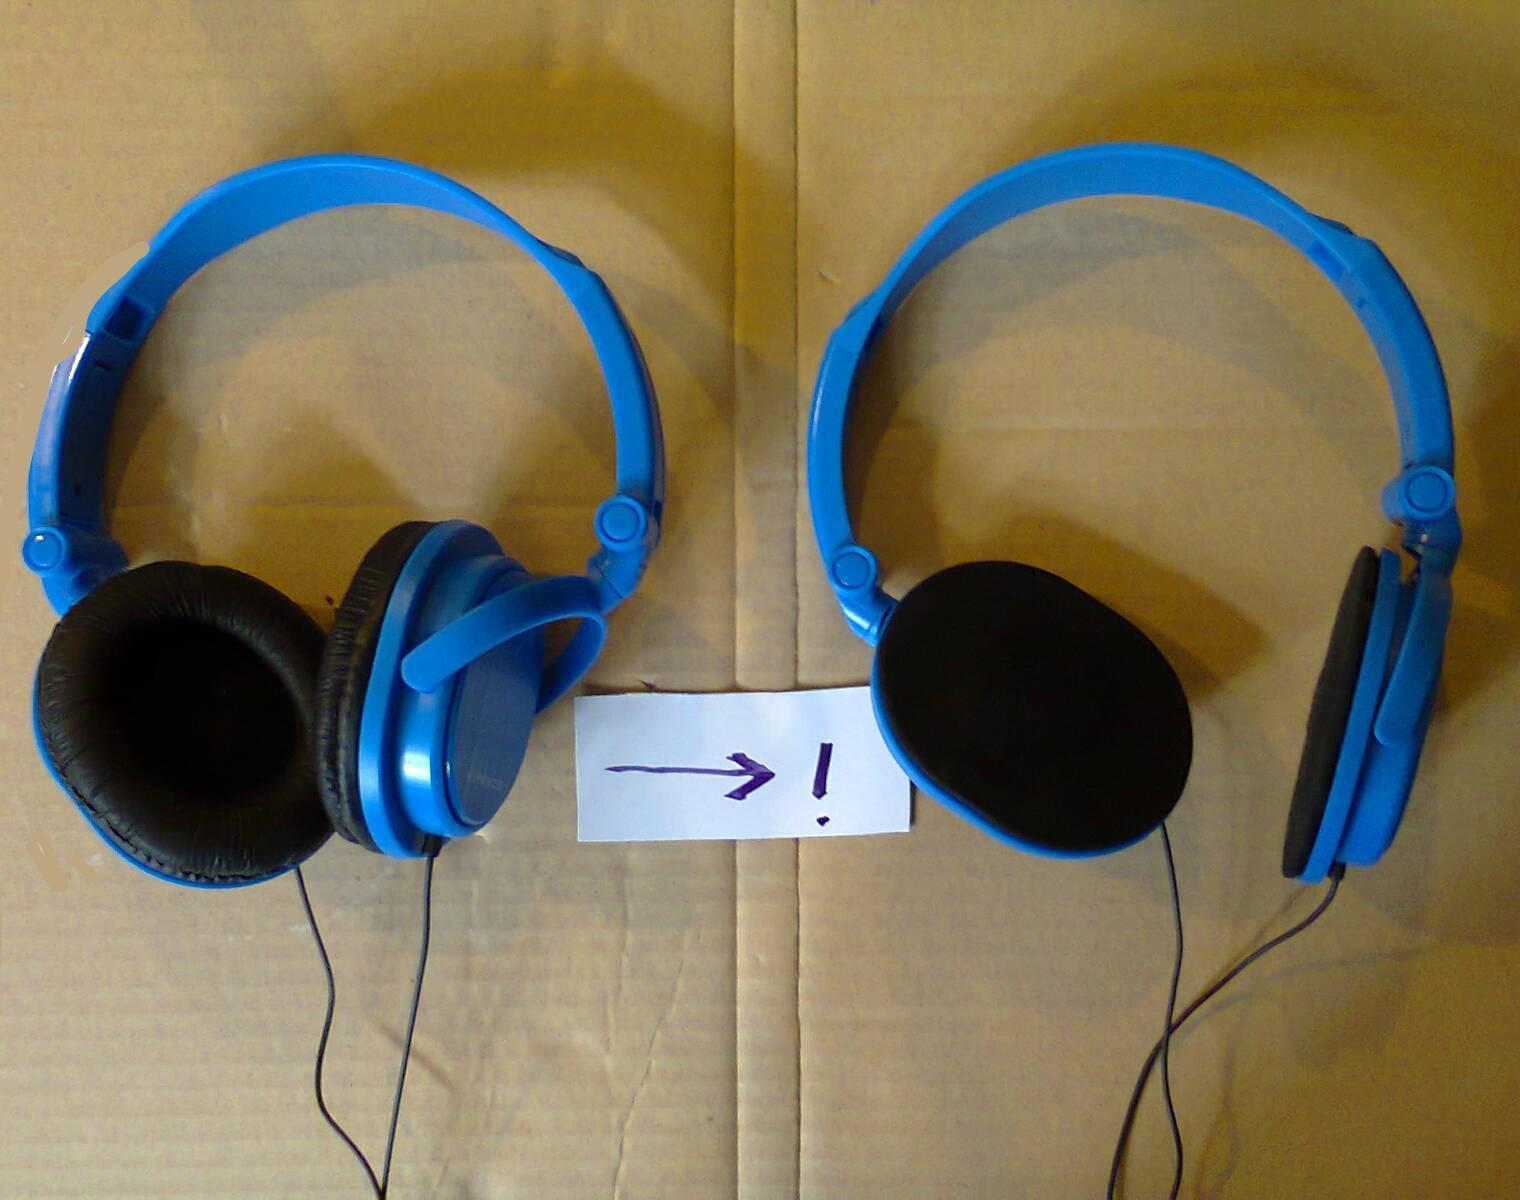 Easily Transform Basic Headphones Into 'Ear Speakers'. No More Head-Clamp!